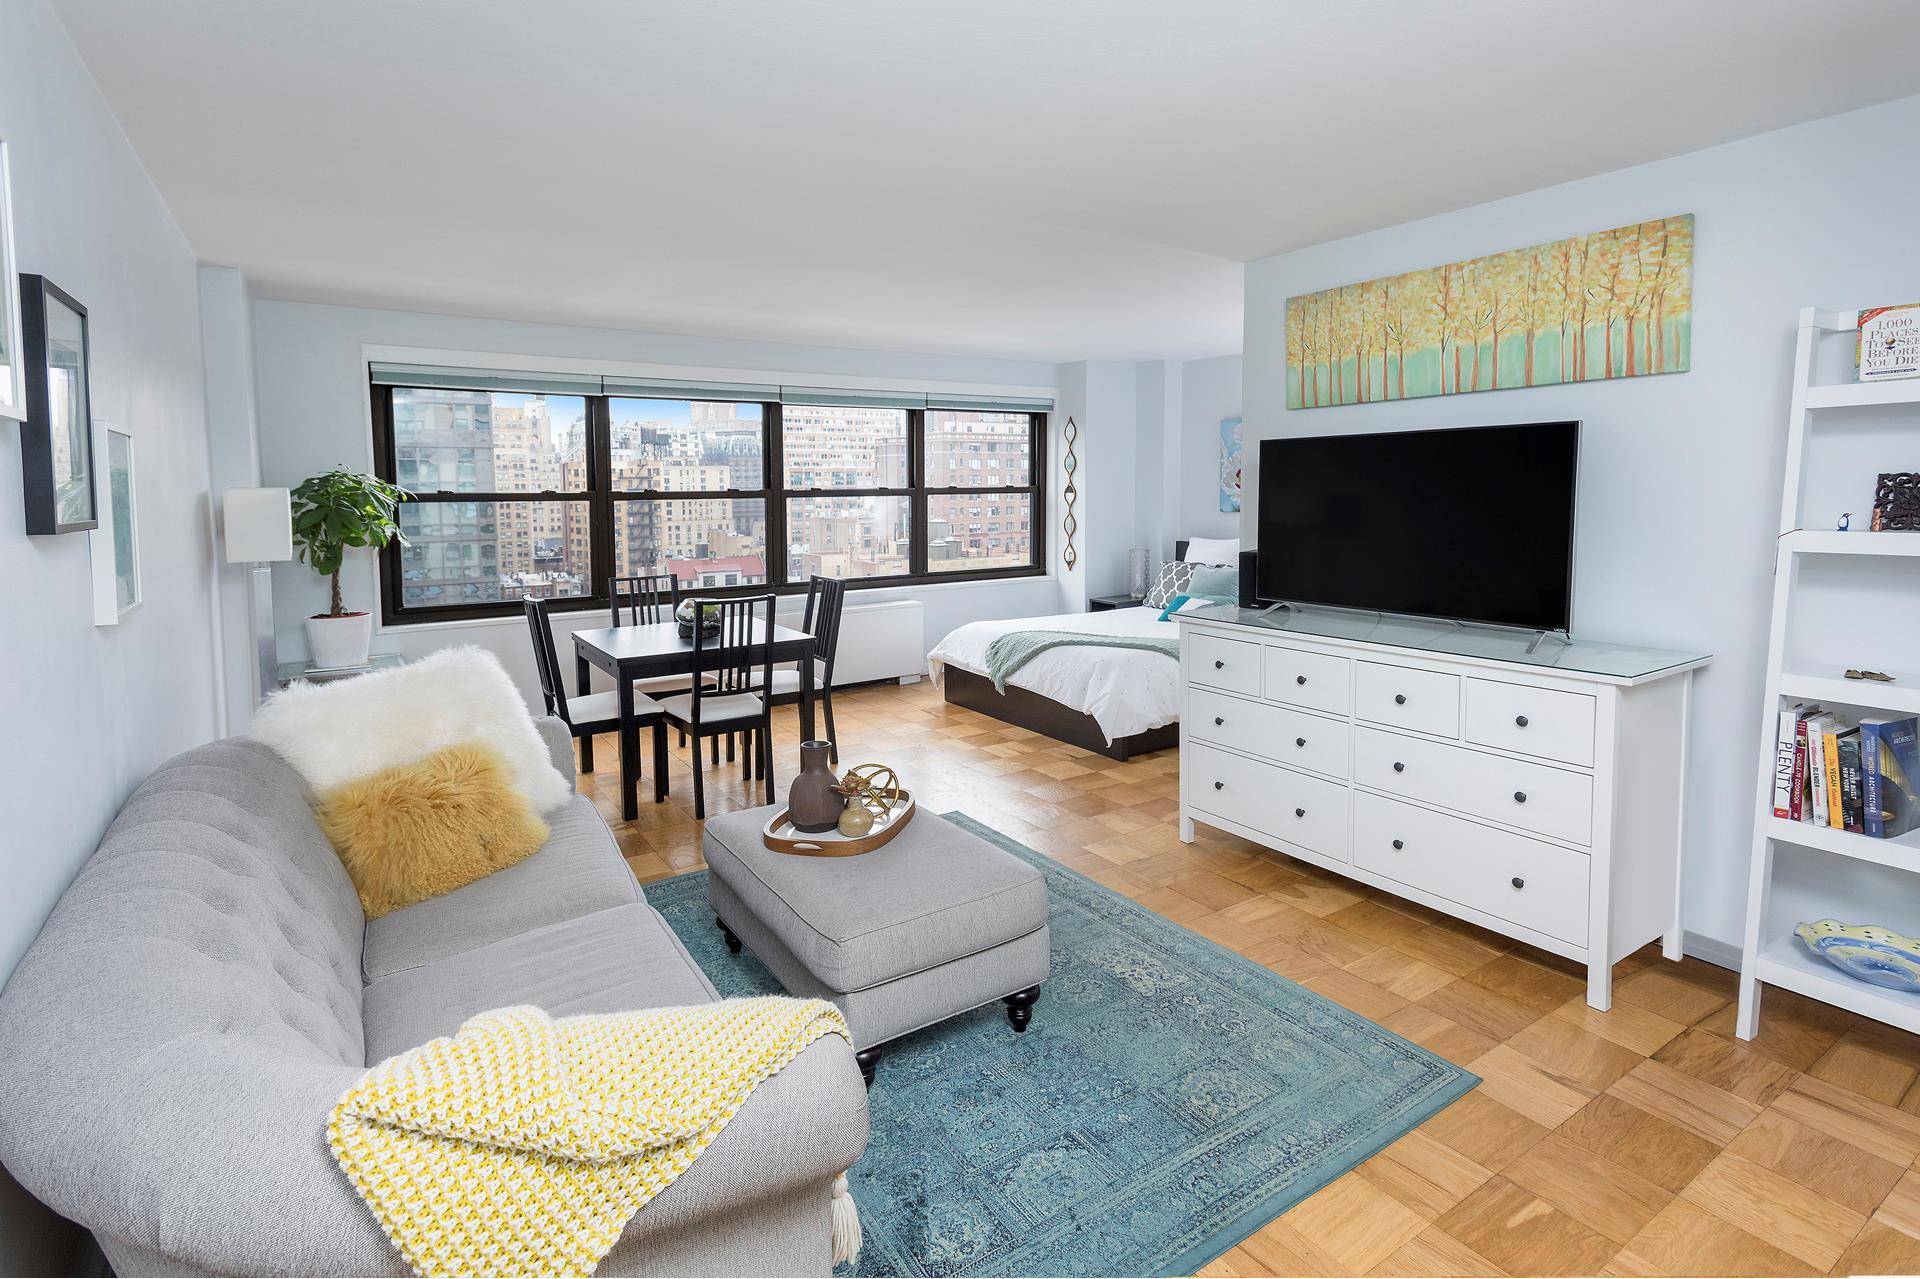 NEW PRICE ! Easy Showings, by APPOINTMENT ONLY This bright, cheerful, spacious UWS alcove studio apartment makes the perfect home or pied a terre.